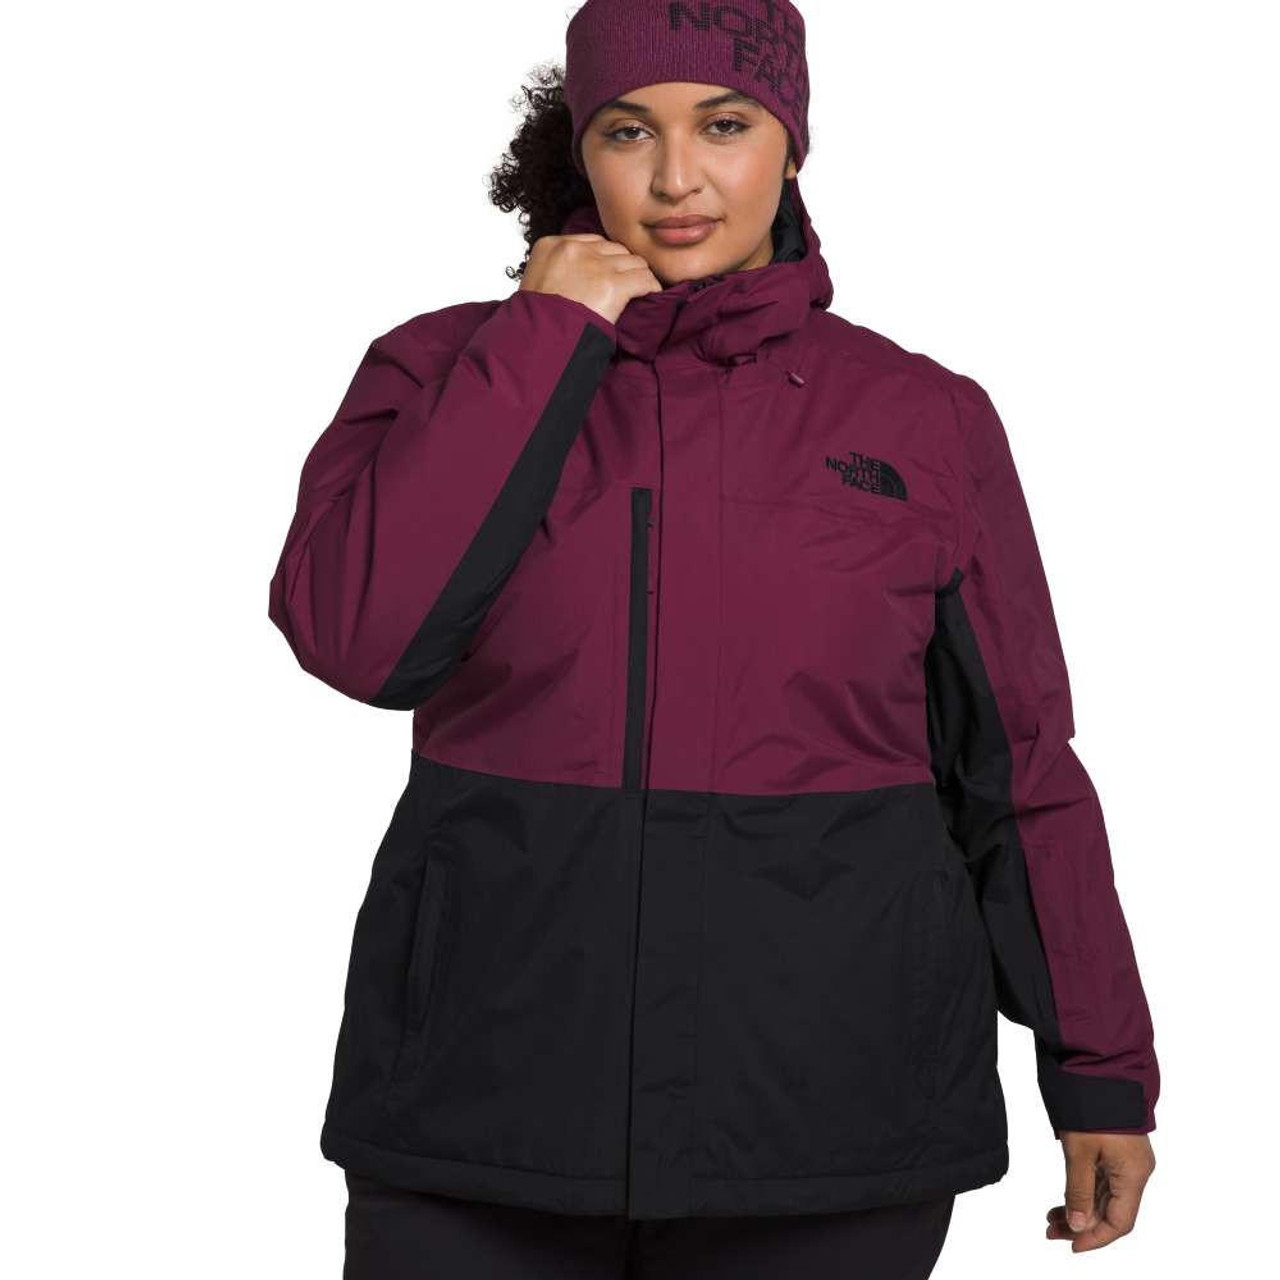 https://cdn11.bigcommerce.com/s-186hk/images/stencil/1280x1280/products/93834/154761/the-north-face-2024-the-north-face-plus-freedom-insulated-womens-jacket__91038.1695755284.jpg?c=2?imbypass=on